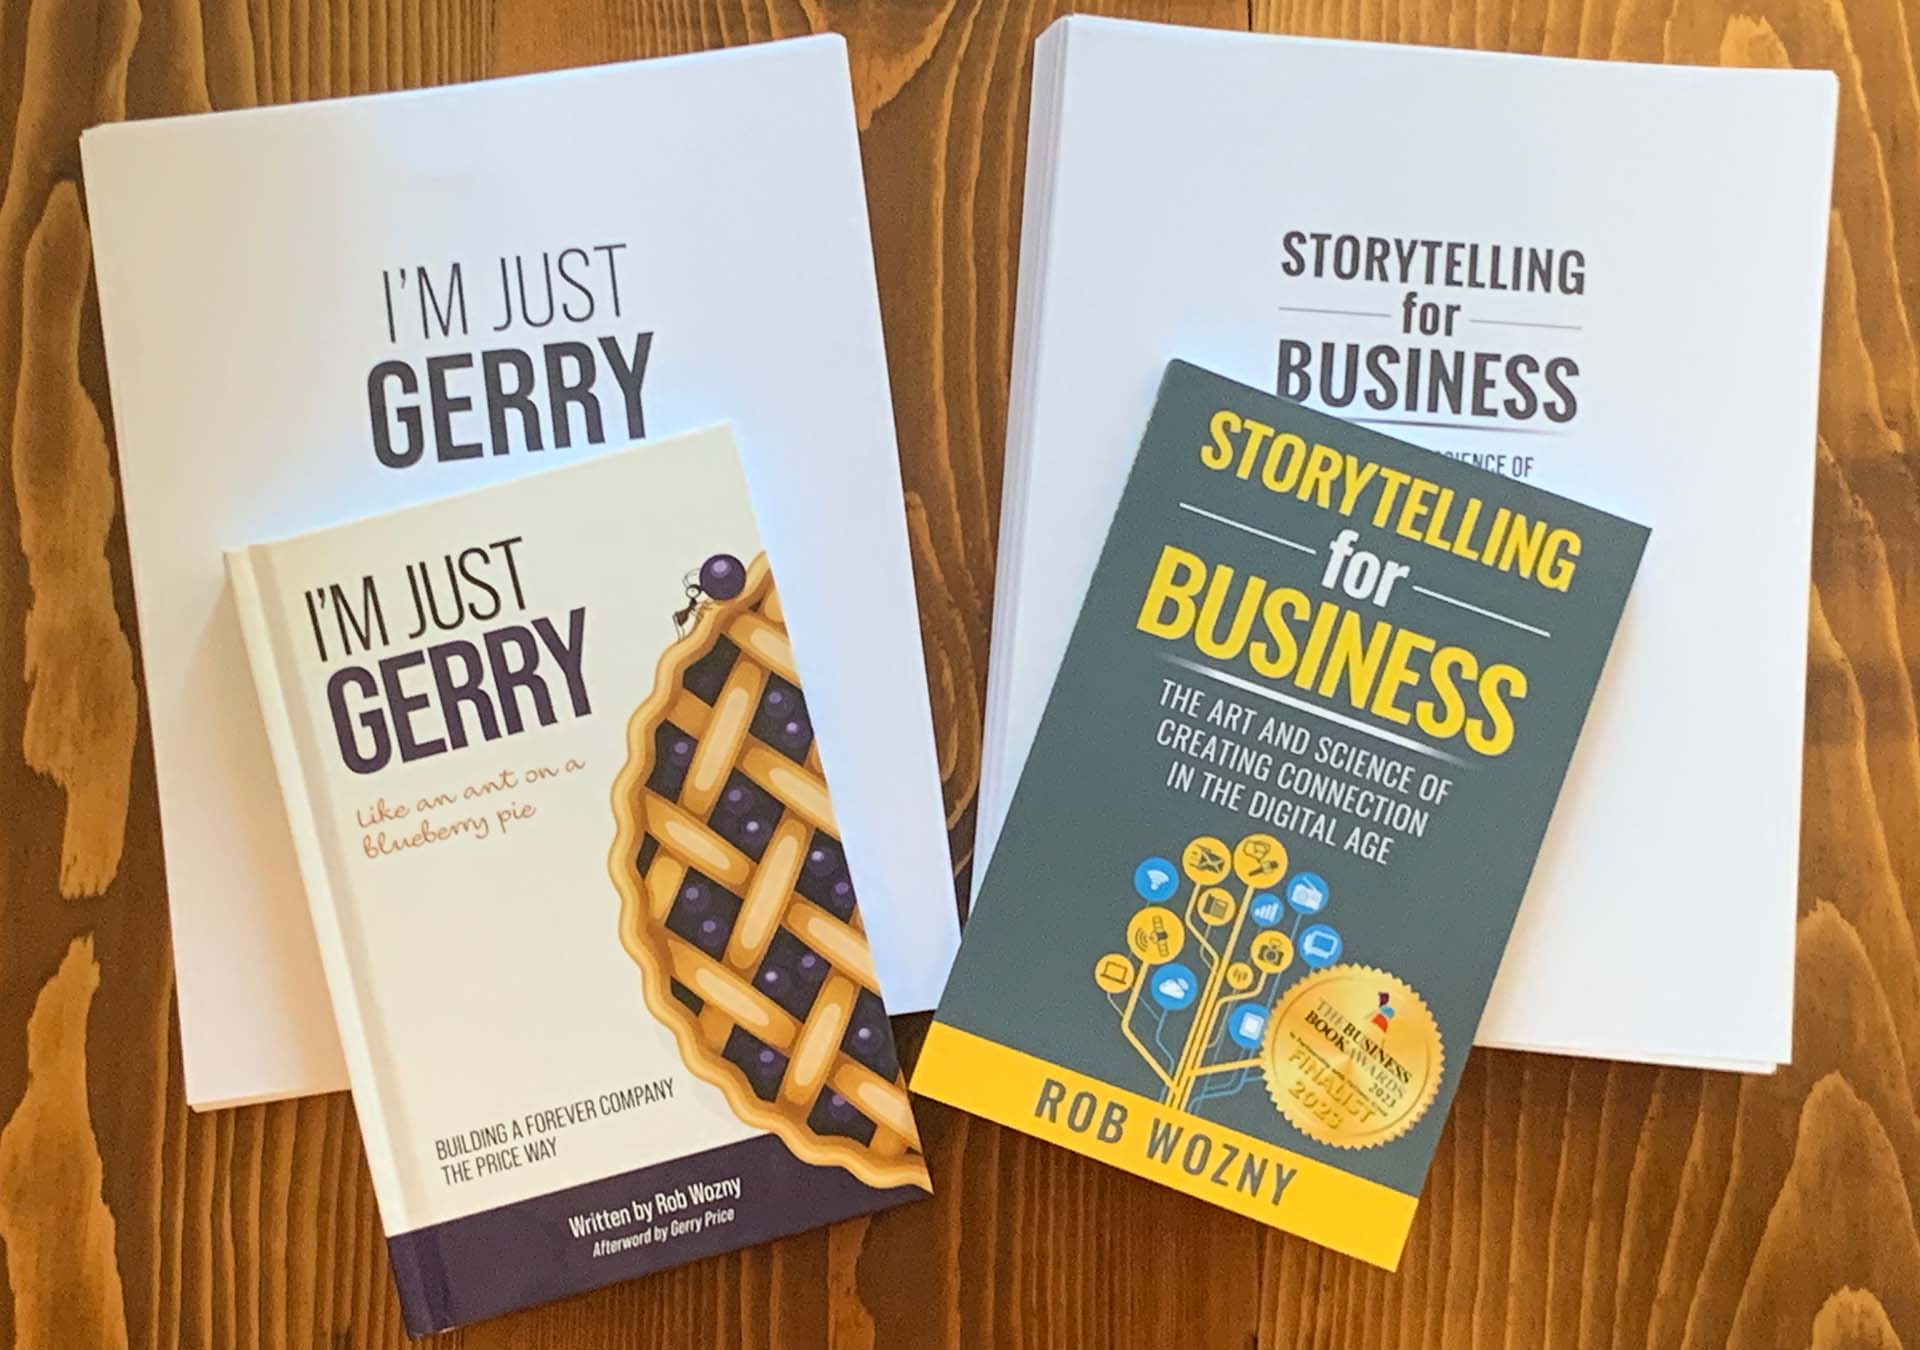 Book covers and manuscripts for I'm Just Gerry and Storytelling for Business